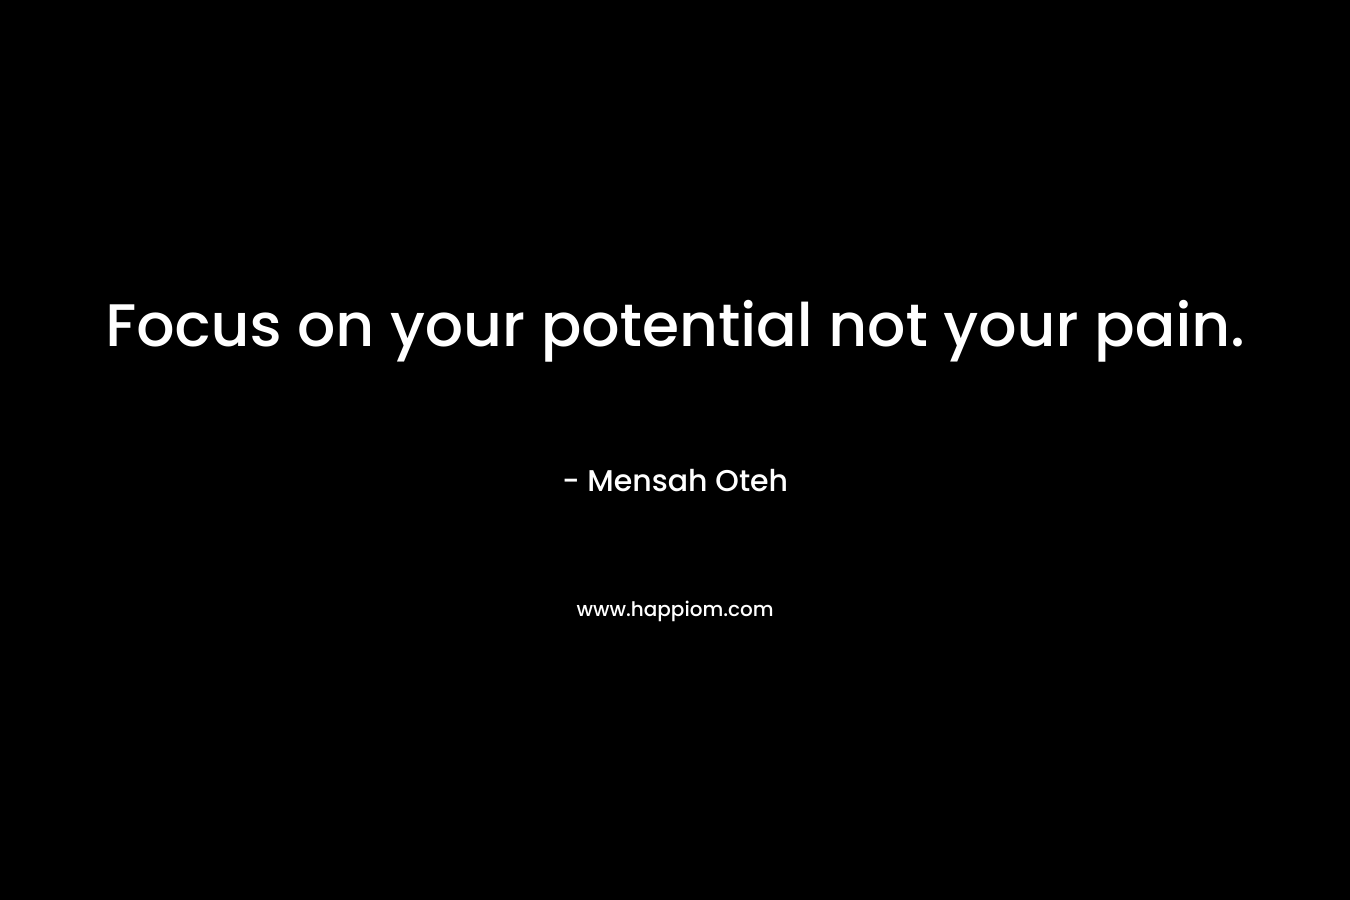 Focus on your potential not your pain.